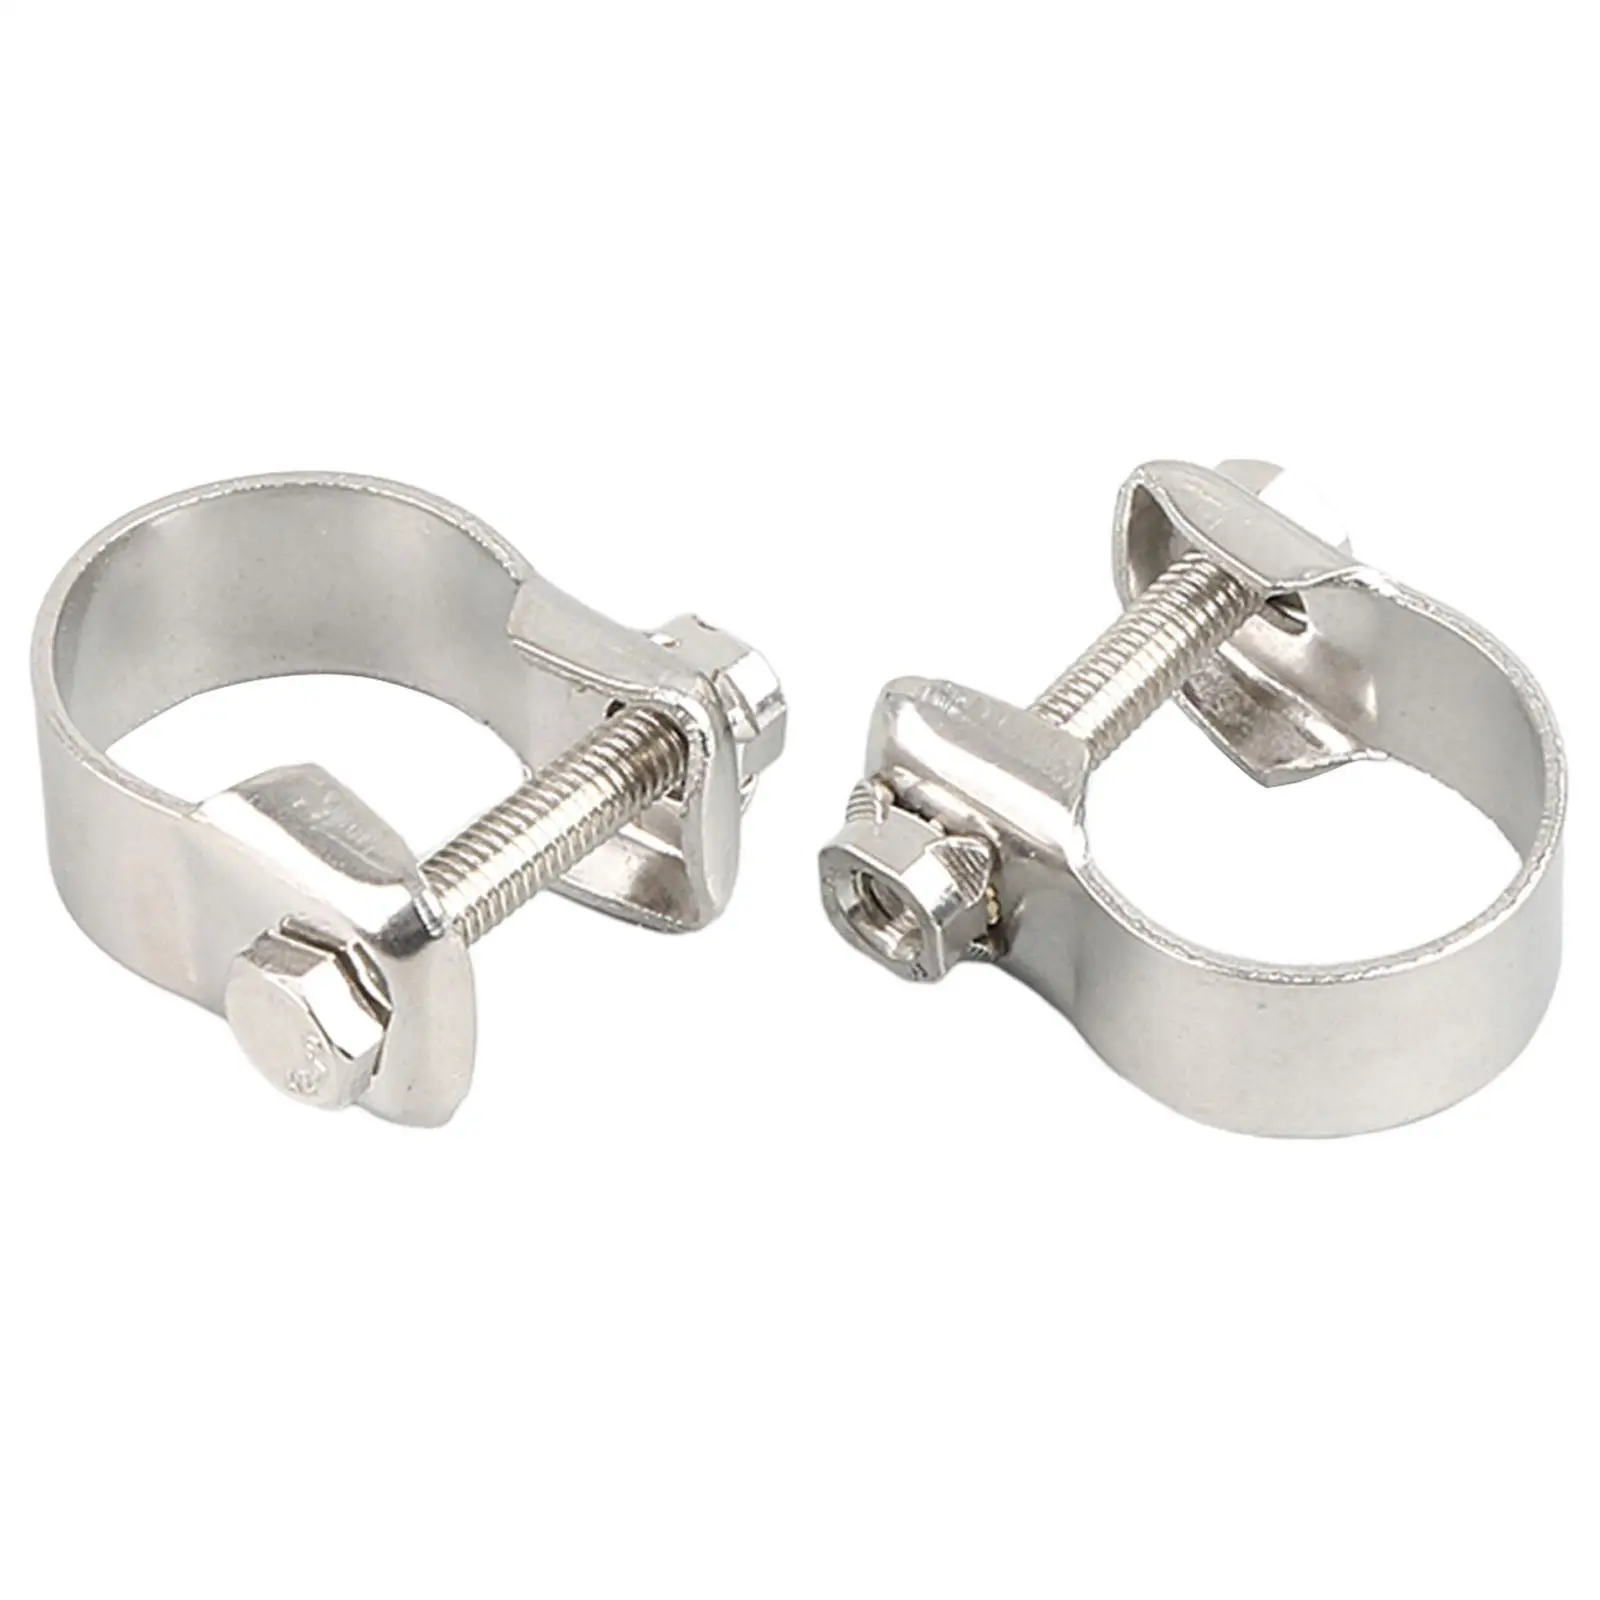 2x Exhaust Clamp Universal for Long Service Life Stable Performance